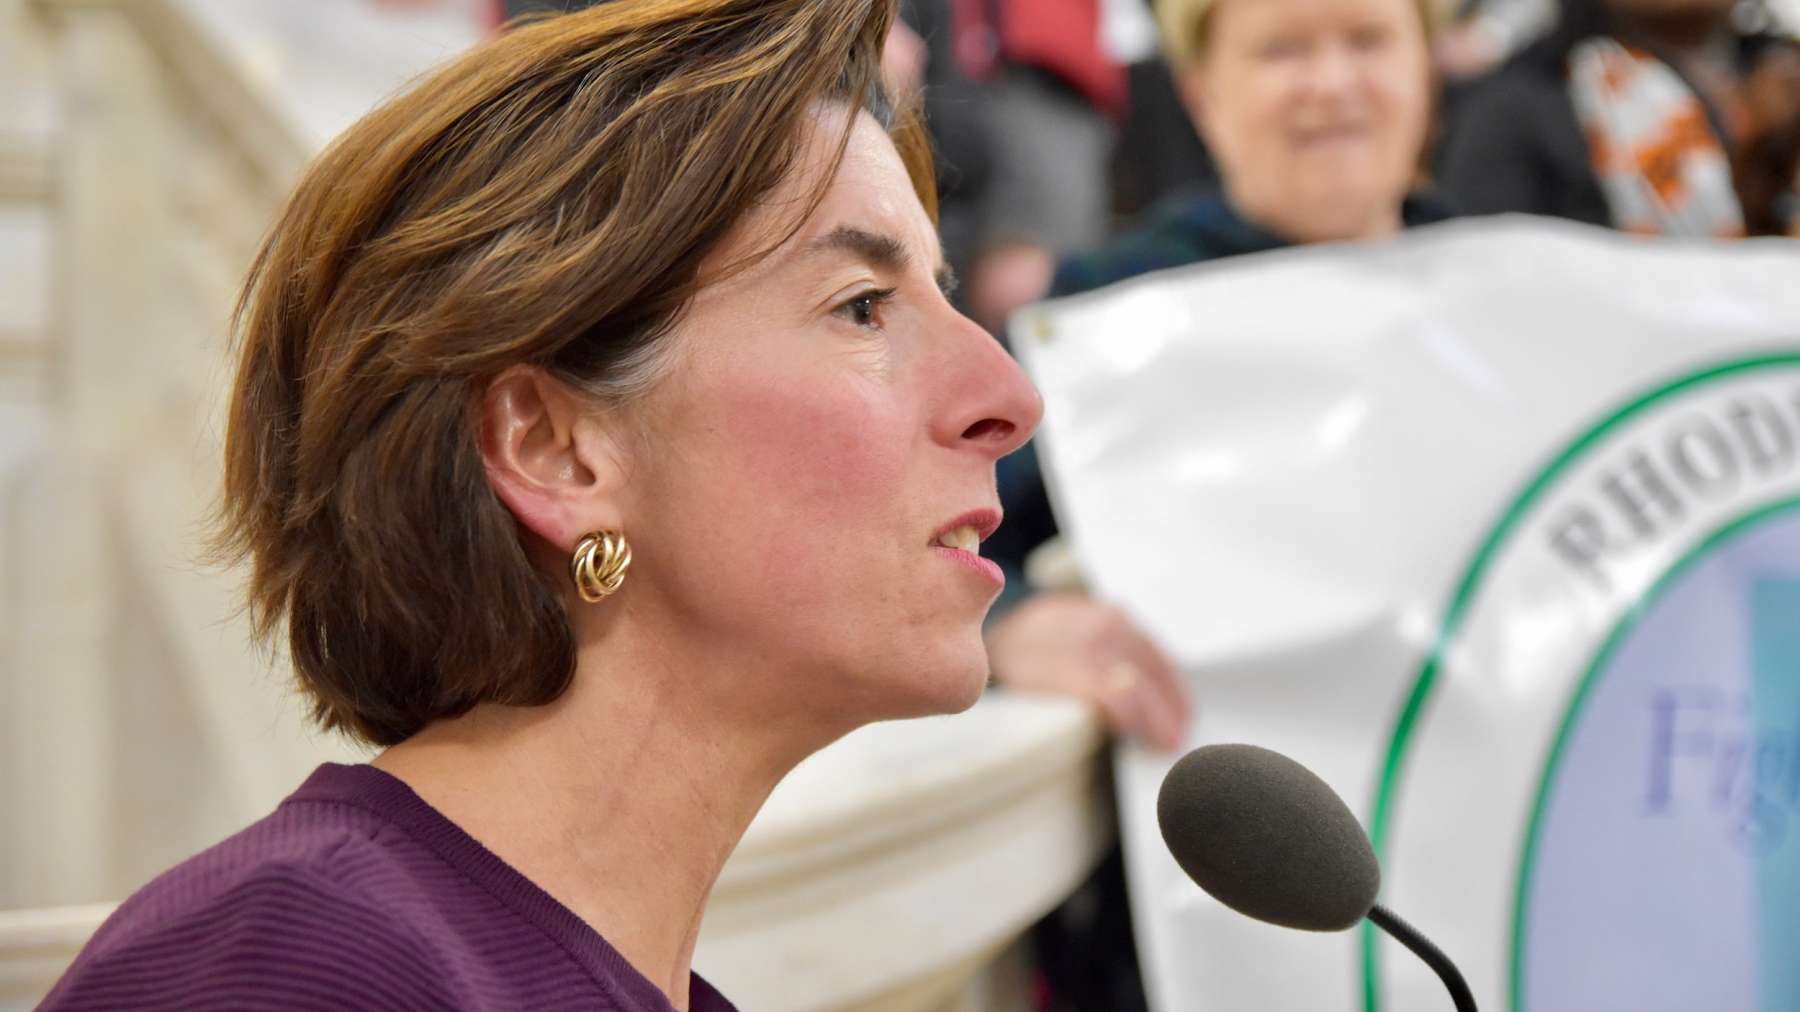 Rhode Island News: Governor’s grade on transportation-environment policies: “D” for Disappointment